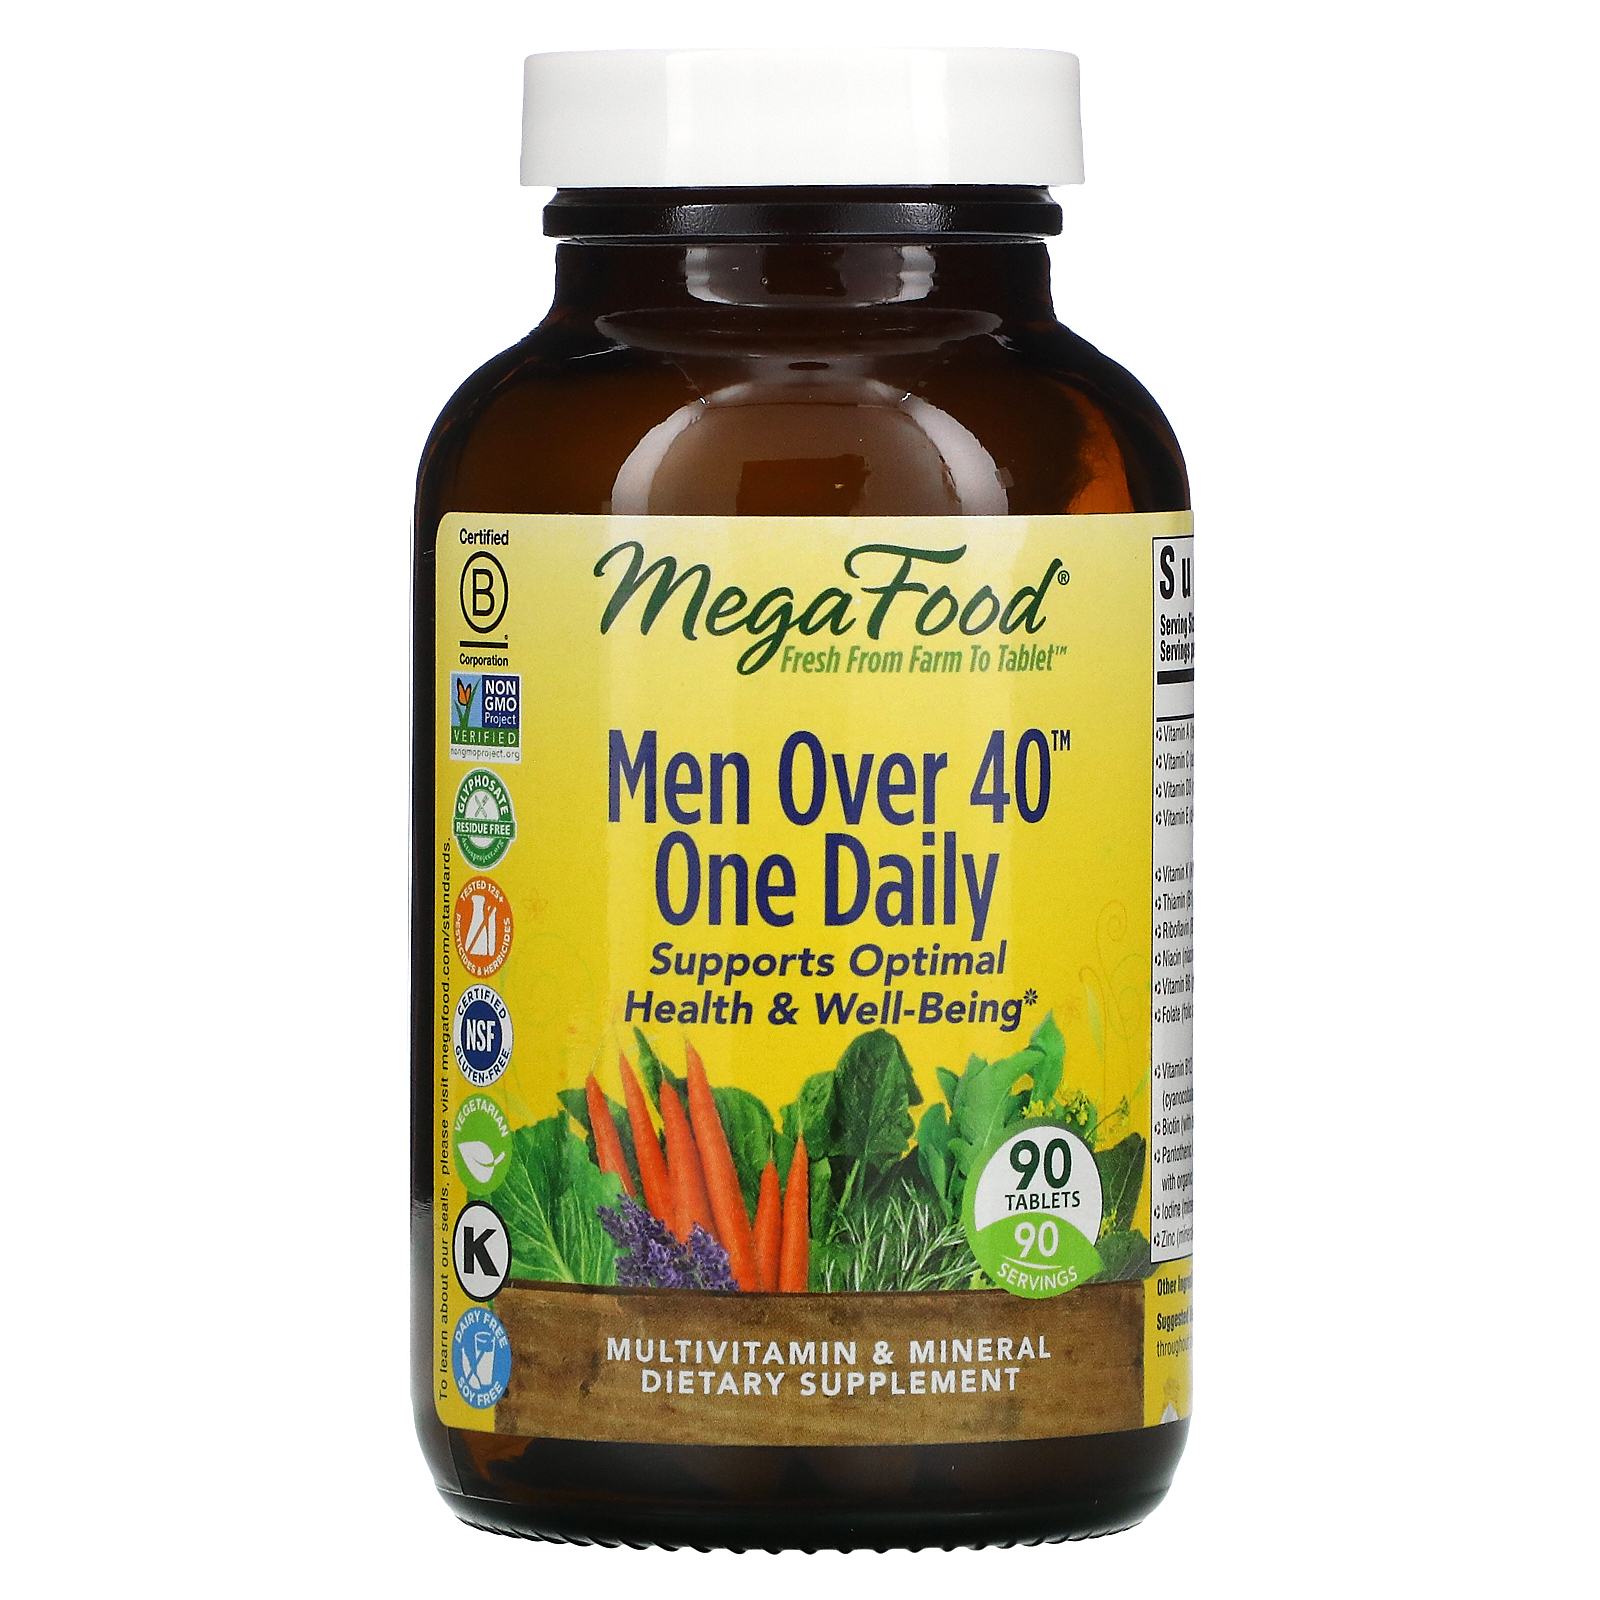 Megafood Men Over 40 One Daily 90 Tablets Iherb 